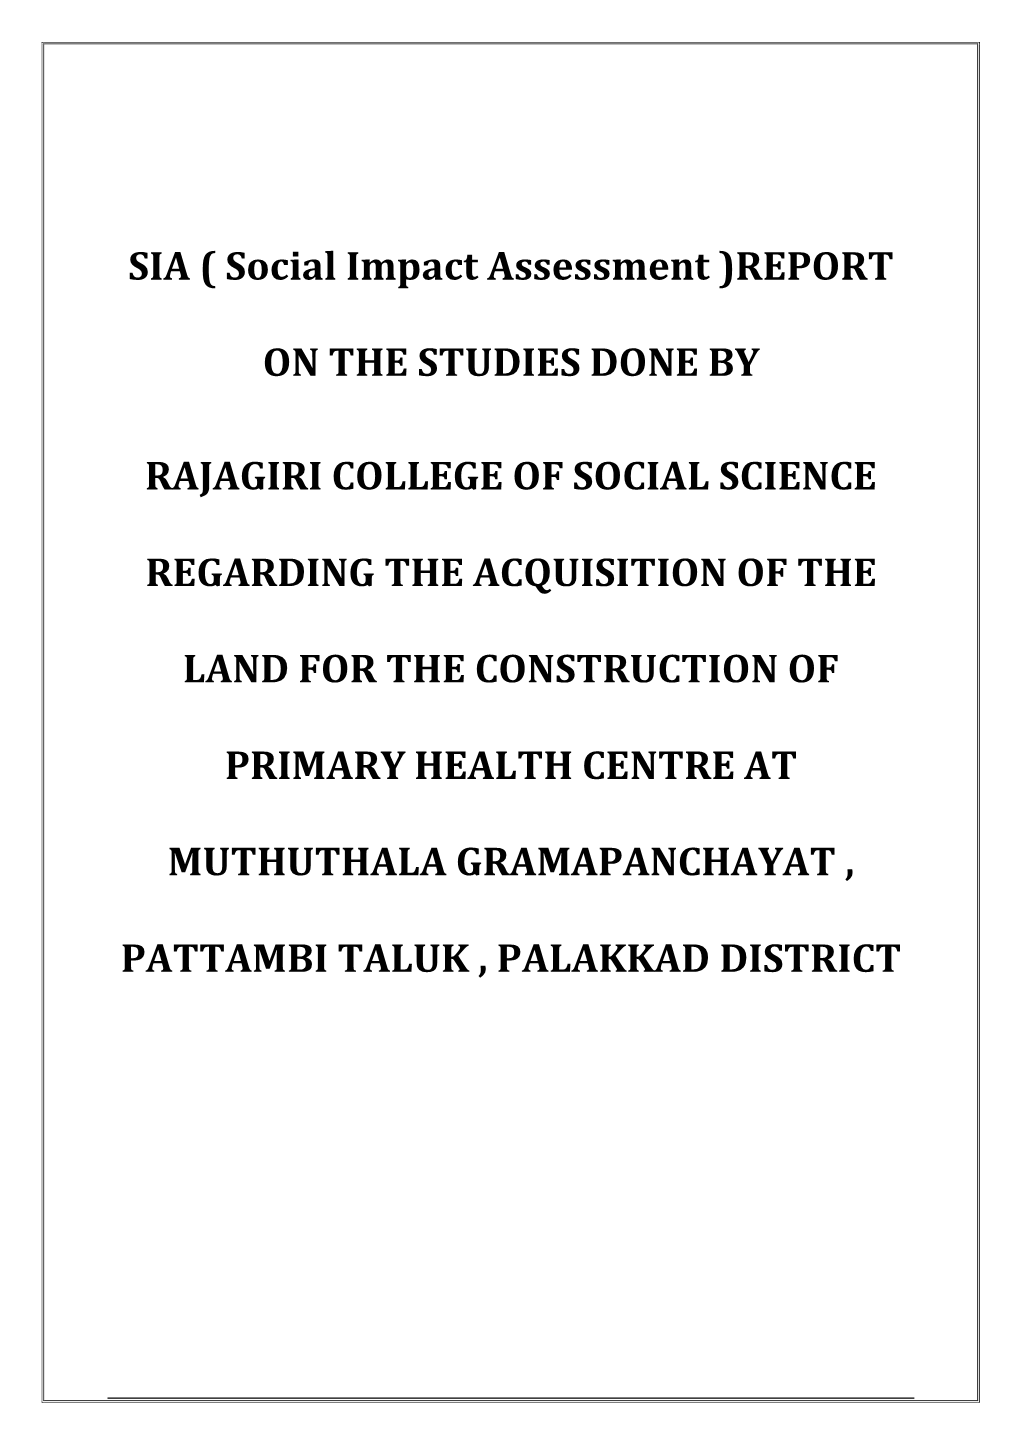 SIA ( Social Impact Assessment )REPORT on the STUDIES DONE